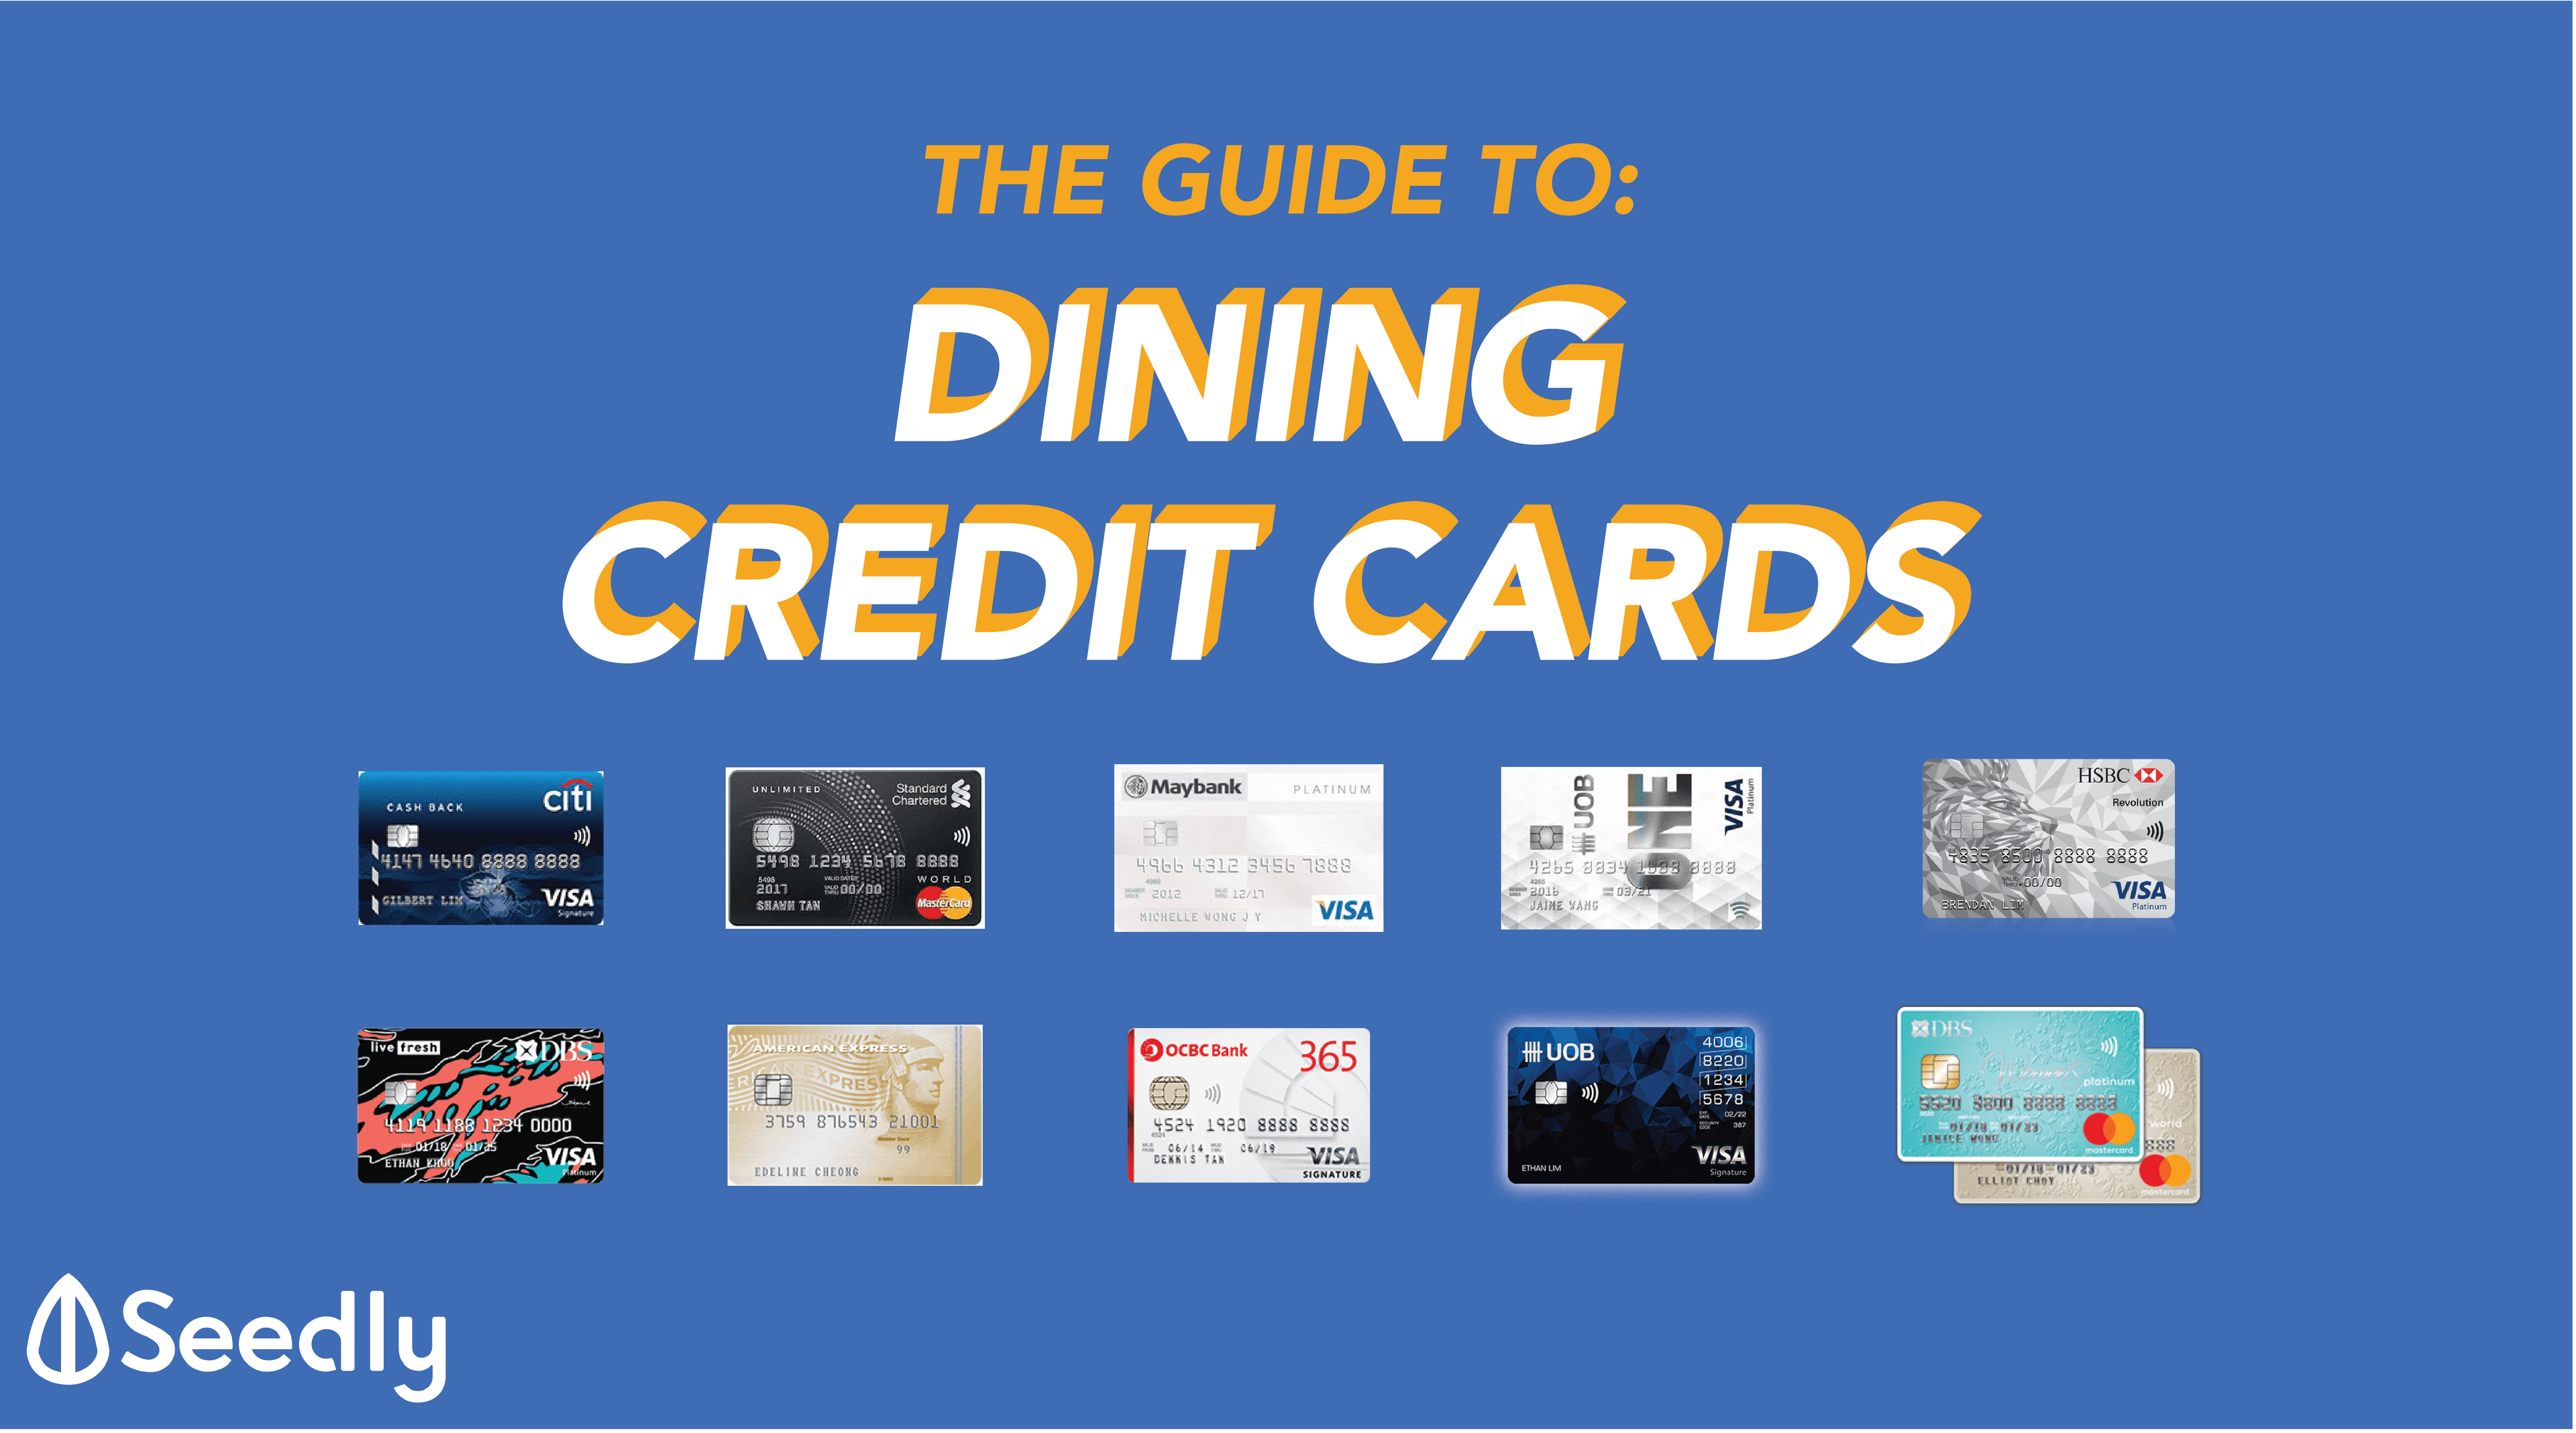 Best dining credit cards singapore 2018